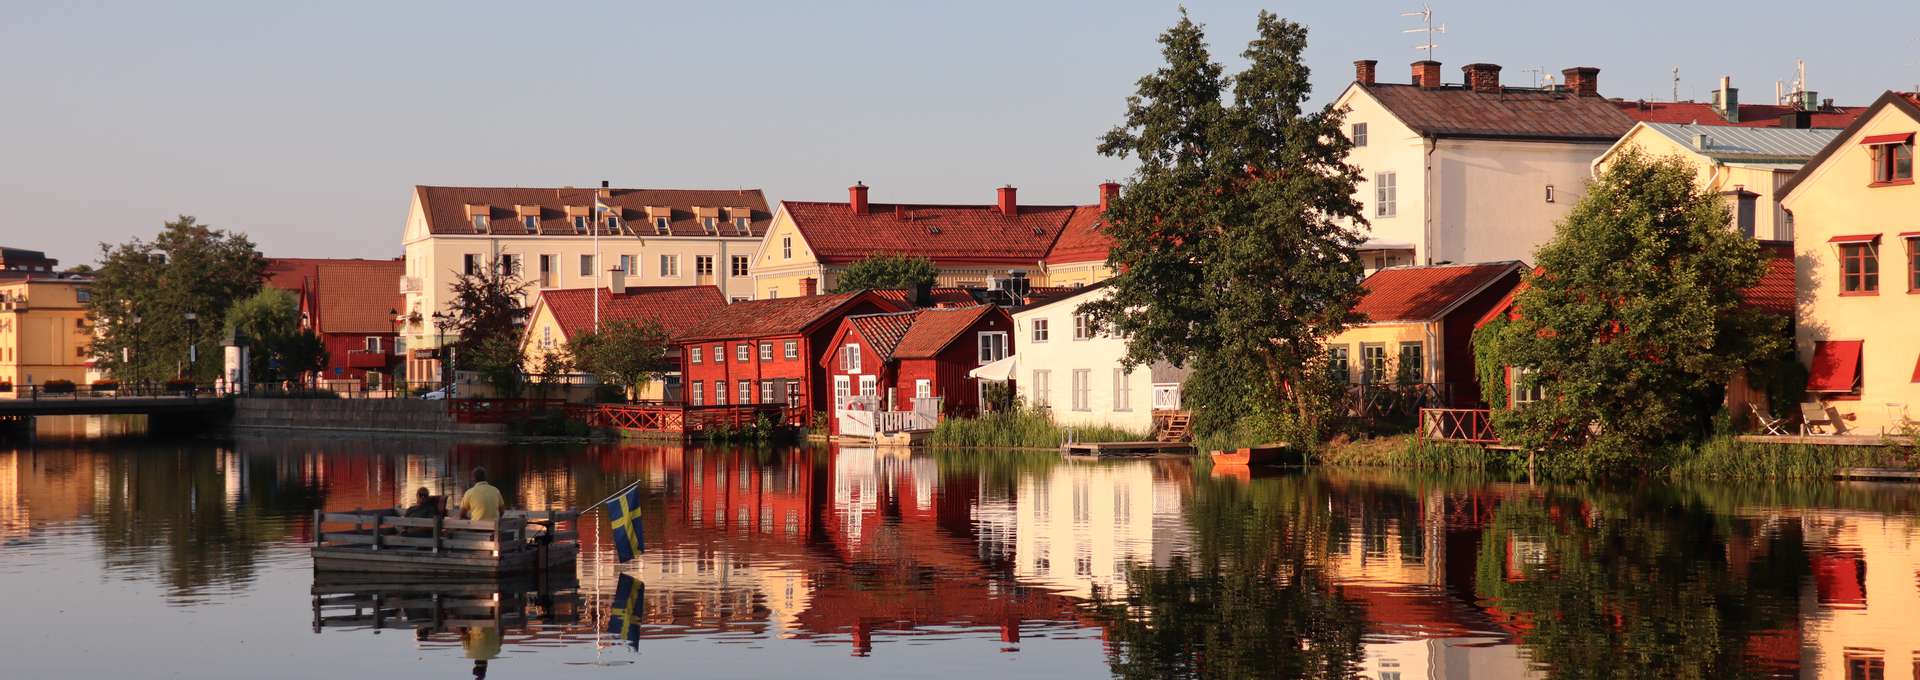 The Eskilstuna river with the old houses in the Old town in the background